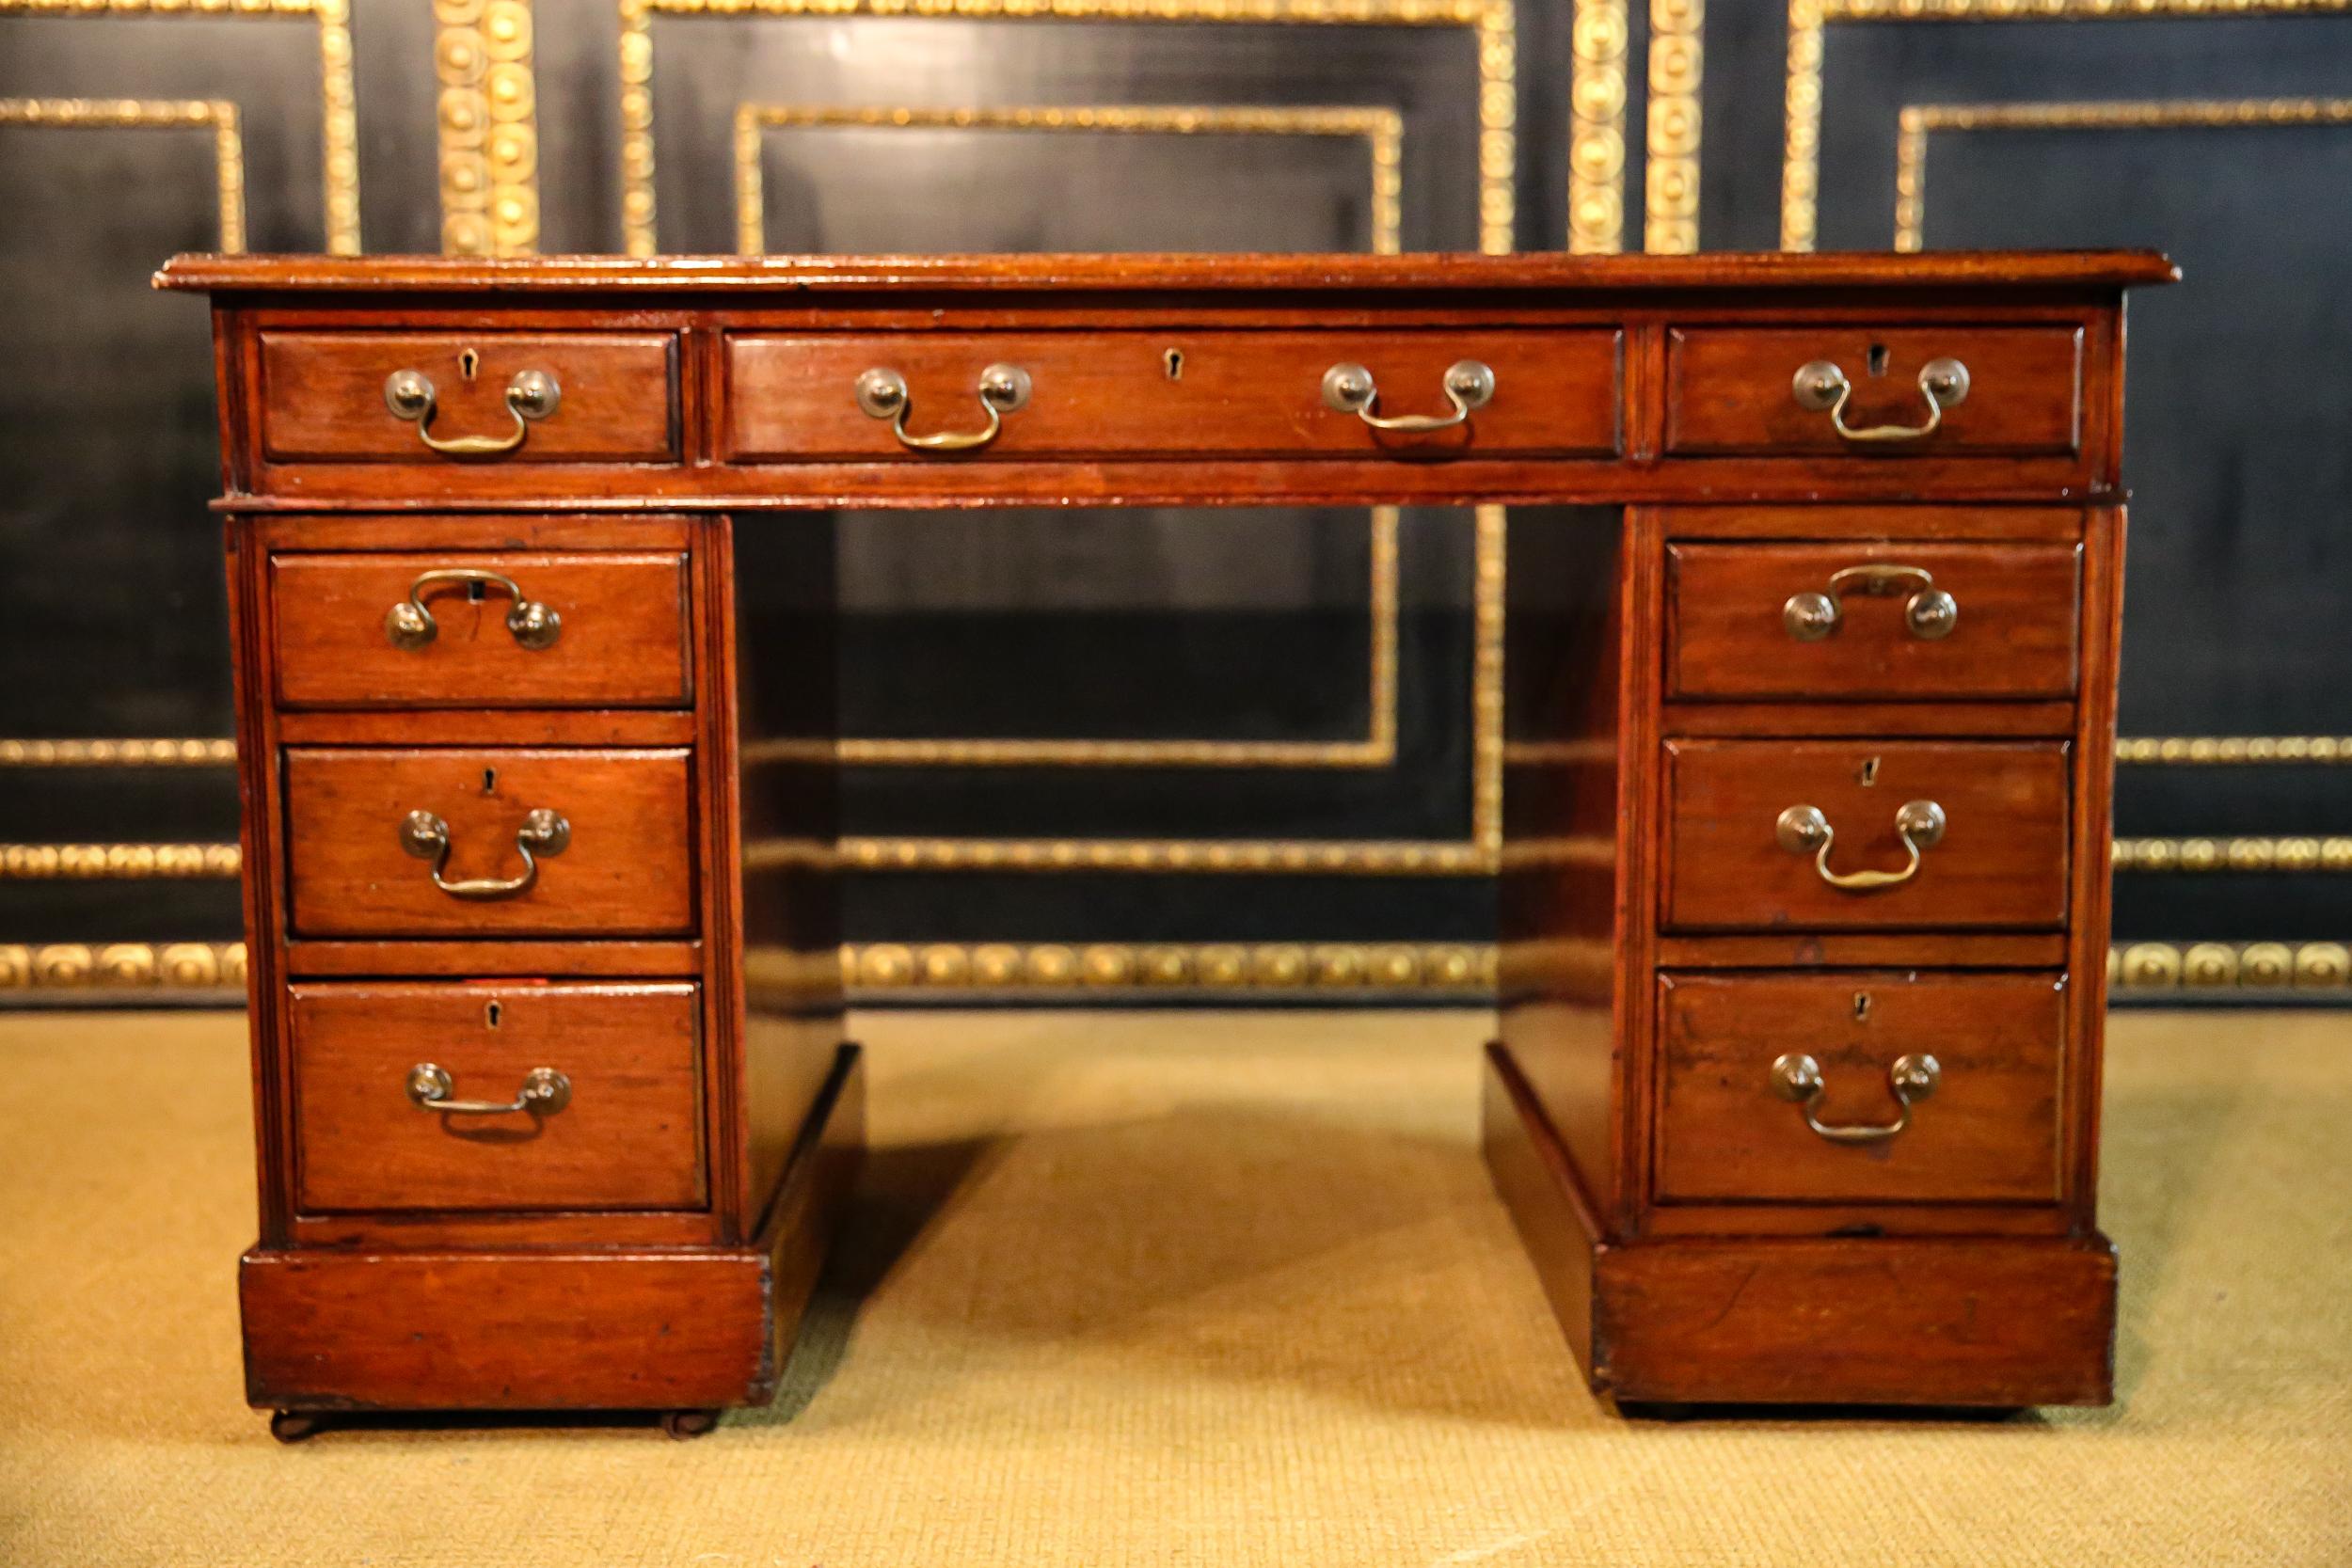 Early 20th Century Original English Desk with Leather Plate